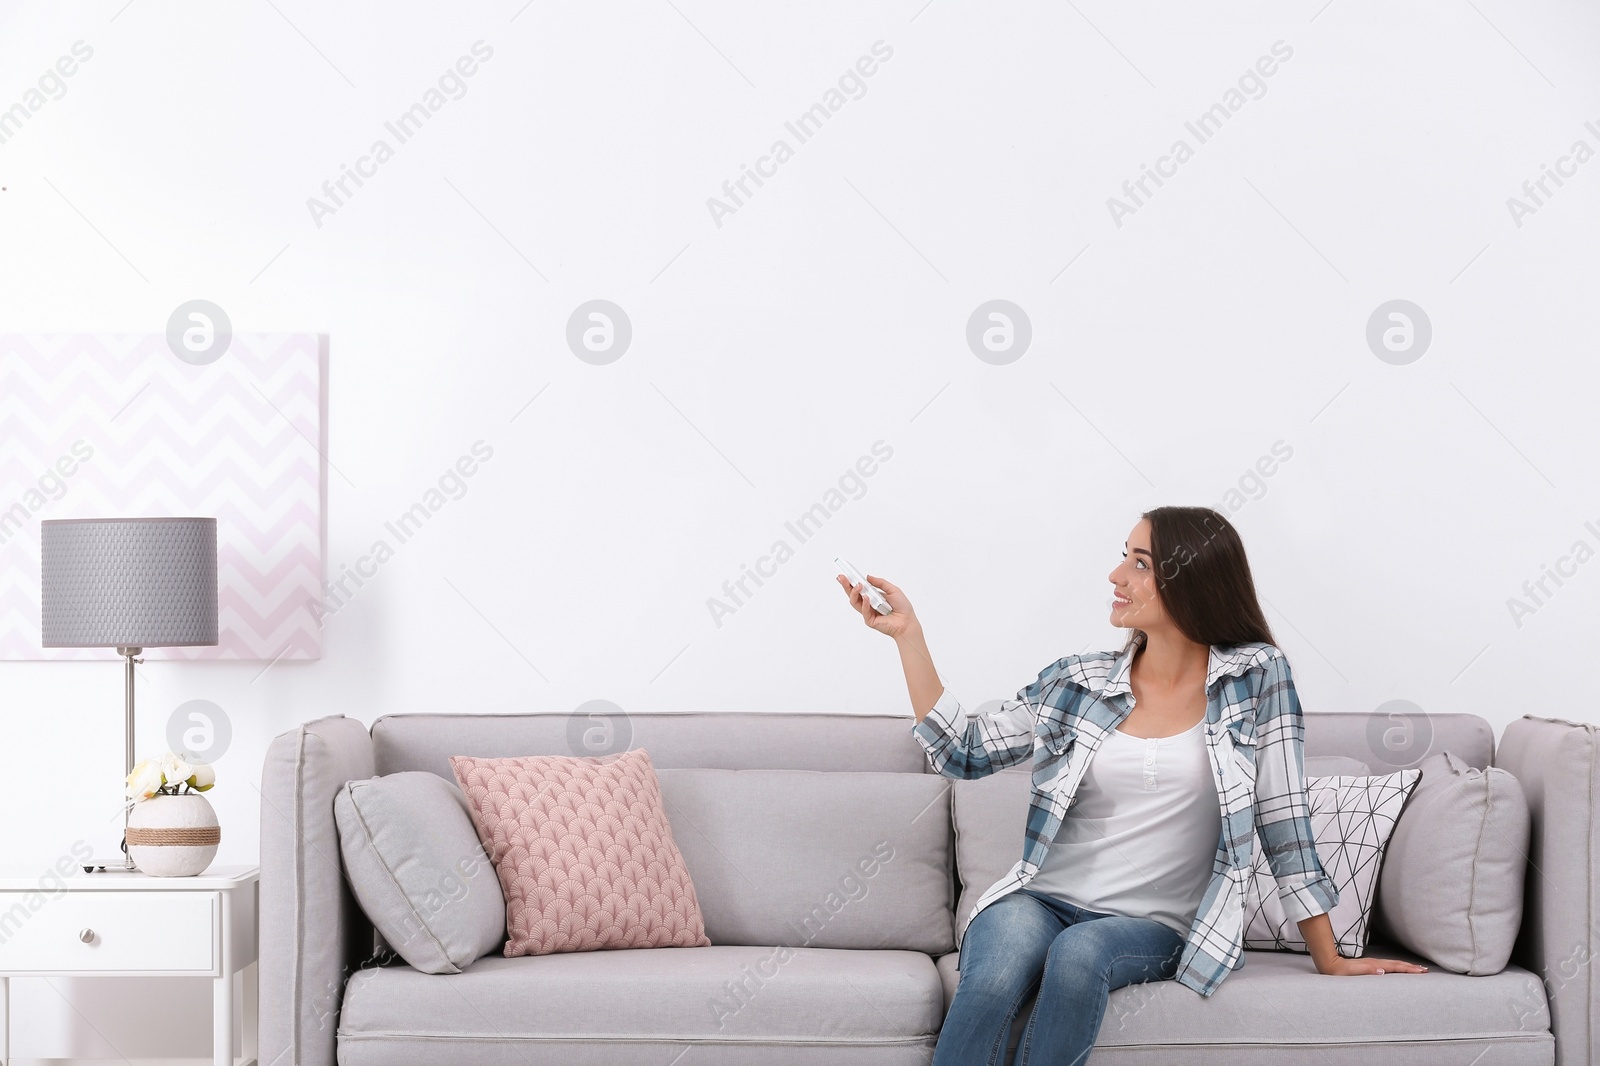 Photo of Young woman switching on air conditioner while sitting on sofa near white wall